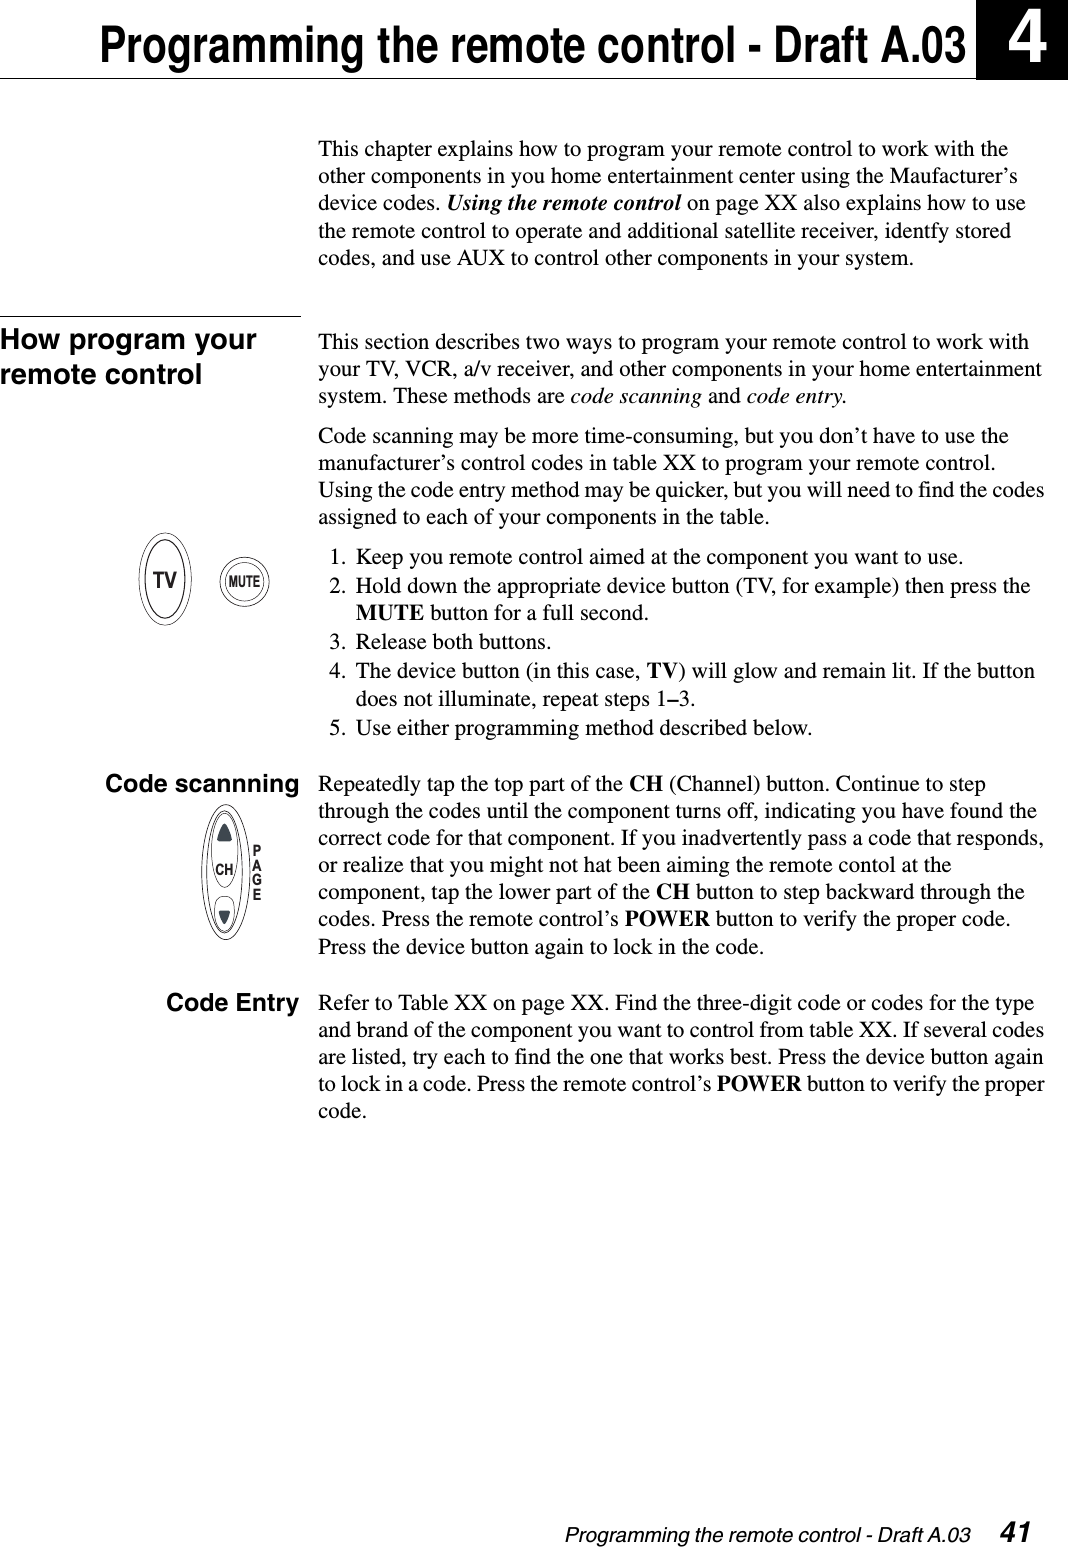 Programming the remote control - Draft A.03  41Programming the remote control - Draft A.03 4This chapter explains how to program your remote control to work with the other components in you home entertainment center using the Maufacturer’s device codes. Using the remote control on page XX also explains how to use the remote control to operate and additional satellite receiver, identfy stored codes, and use AUX to control other components in your system.How program your remote controlThis section describes two ways to program your remote control to work with your TV, VCR, a/v receiver, and other components in your home entertainment system. These methods are code scanning and code entry.Code scanning may be more time-consuming, but you don’t have to use the manufacturer’s control codes in table XX to program your remote control. Using the code entry method may be quicker, but you will need to find the codes assigned to each of your components in the table. 1. Keep you remote control aimed at the component you want to use.2. Hold down the appropriate device button (TV, for example) then press the MUTE button for a full second.3. Release both buttons.4. The device button (in this case, TV) will glow and remain lit. If the button does not illuminate, repeat steps 1–3.5. Use either programming method described below.Code scannning Repeatedly tap the top part of the CH (Channel) button. Continue to step through the codes until the component turns off, indicating you have found the correct code for that component. If you inadvertently pass a code that responds, or realize that you might not hat been aiming the remote contol at the component, tap the lower part of the CH button to step backward through the codes. Press the remote control’s POWER button to verify the proper code. Press the device button again to lock in the code.Code Entry Refer to Table XX on page XX. Find the three-digit code or codes for the type and brand of the component you want to control from table XX. If several codes are listed, try each to find the one that works best. Press the device button again to lock in a code. Press the remote control’s POWER button to verify the proper code.TVMUTEPAGECH